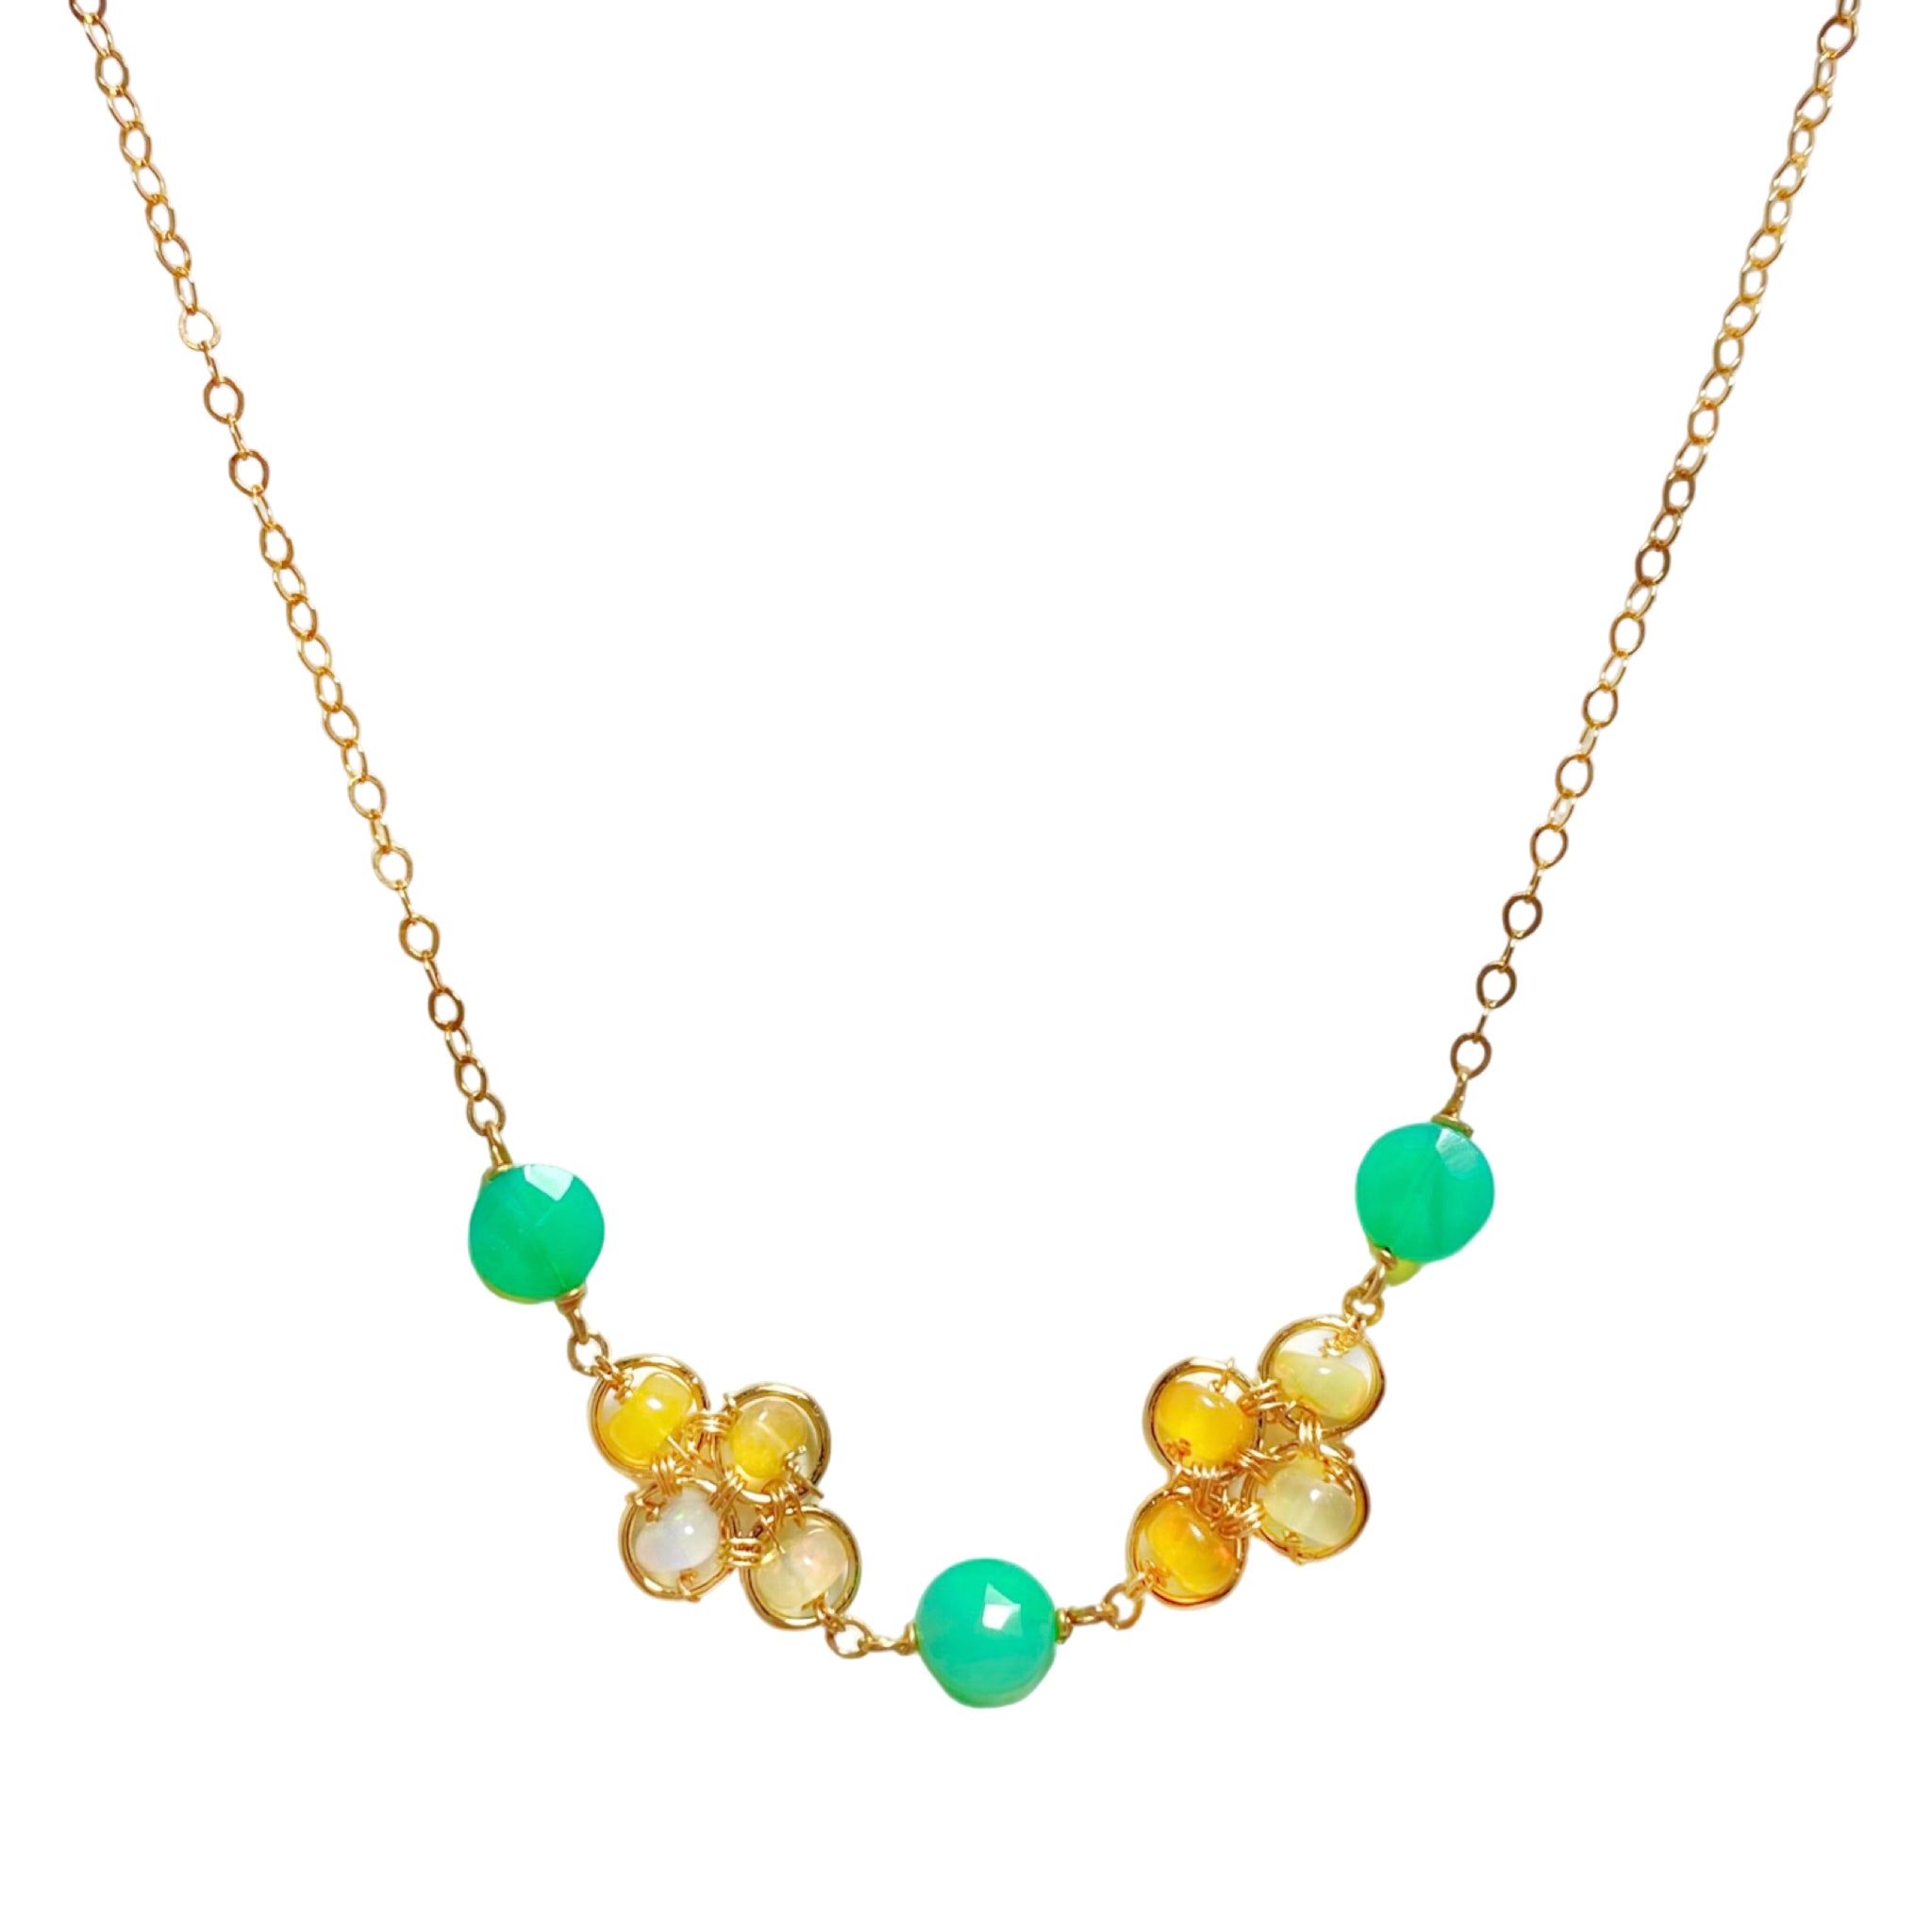 Michelle Pressler Chrysoprase & Ethiopian Opal Clover Necklace -Dainty but bold, this little necklace is crafted with vibrant Ethiopian opals and cheerful chrysoprase. Special worn alone or layer it for an extra splash.  Available at Shaylula Jewlery & Gifts in Tarrytown, NY and online.• Ethiopian opal, chrysoprase, gold filled chain  • 16" L  • Lobster clasp